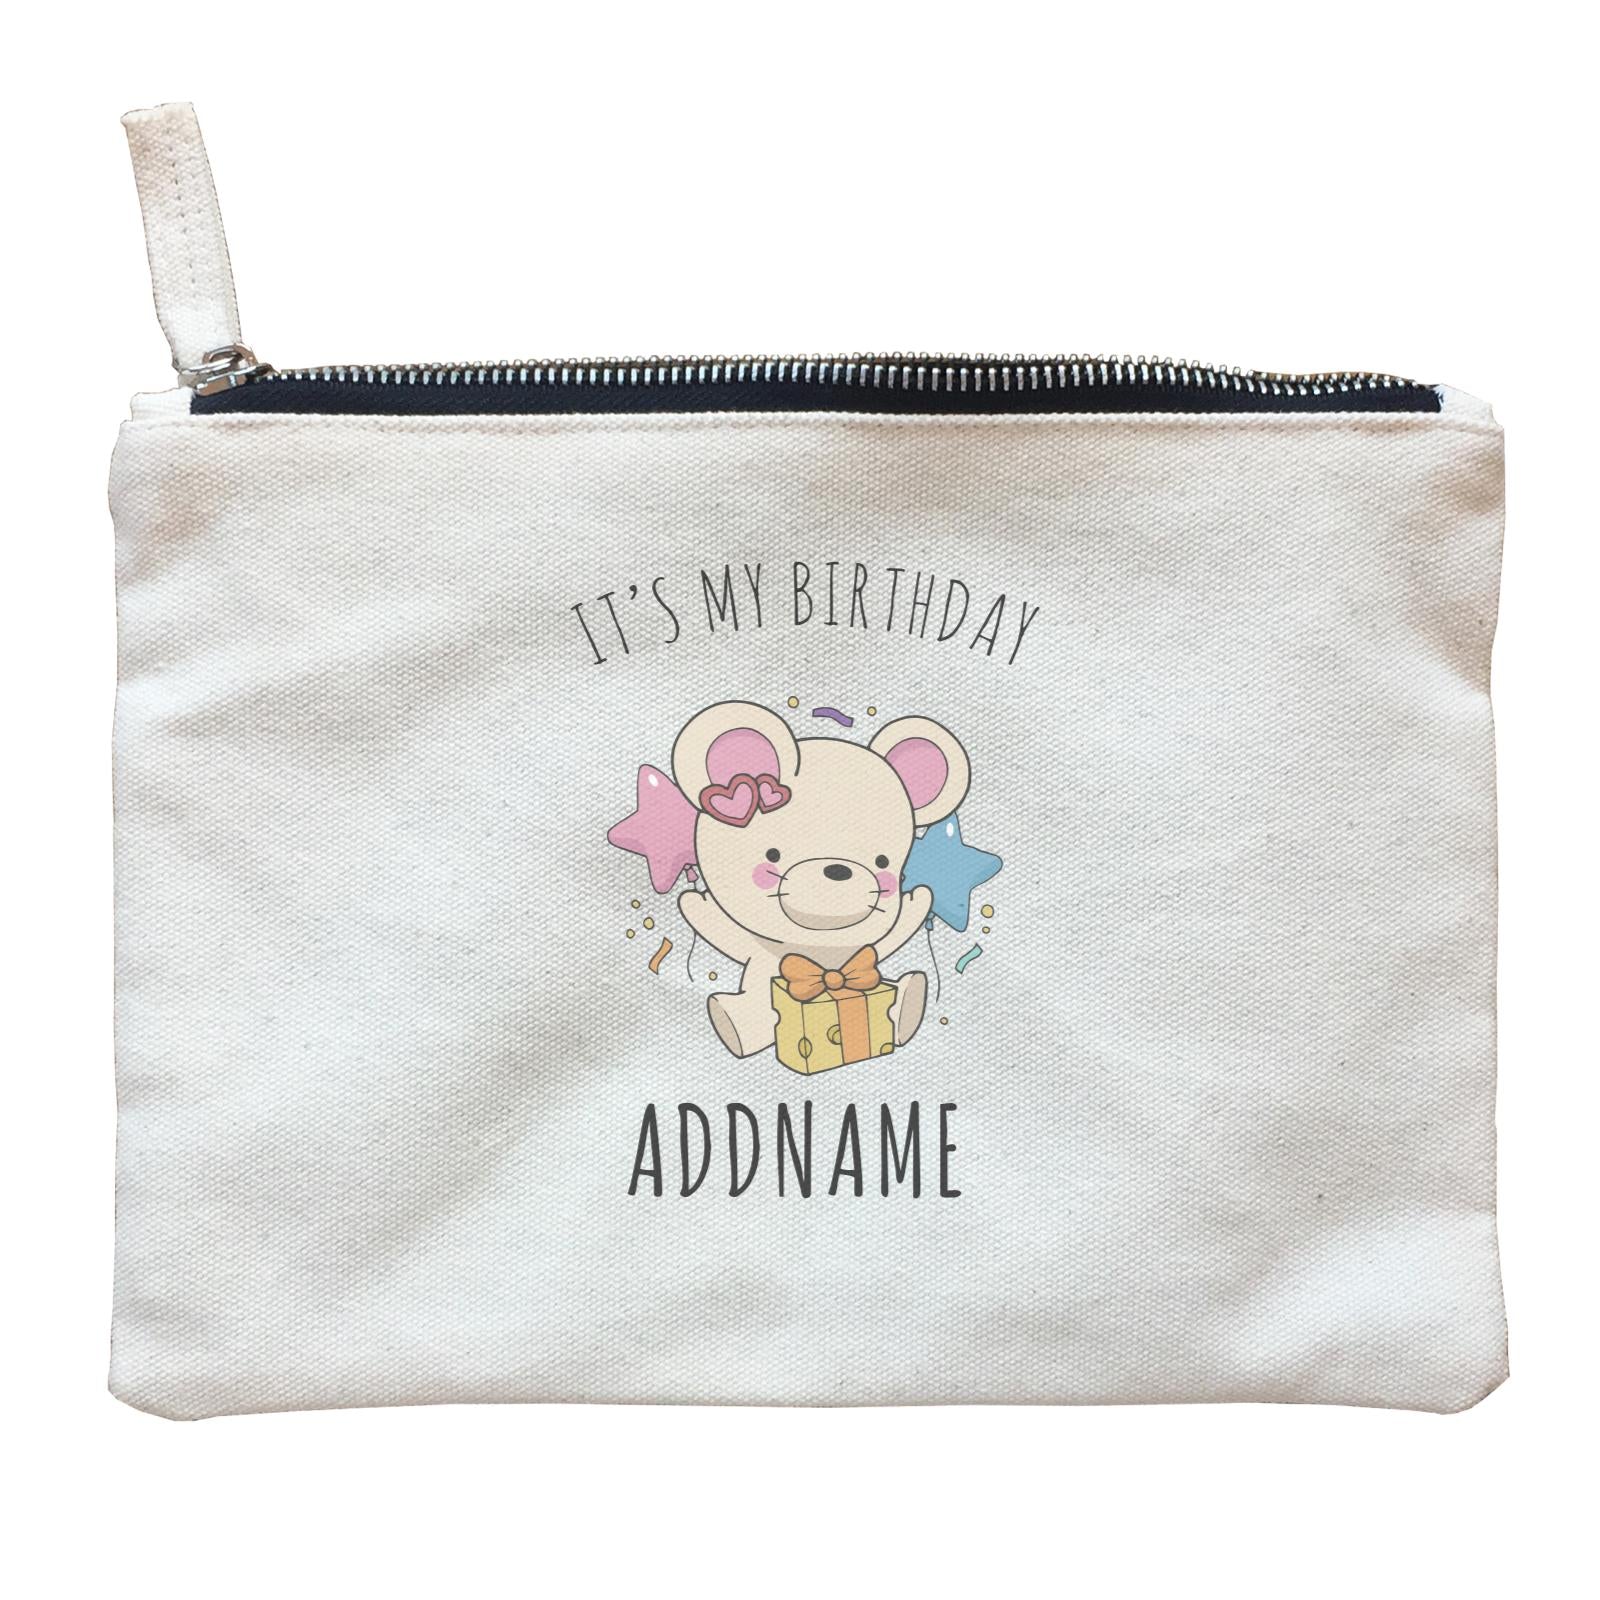 Birthday Sketch Animals Mouse with Cheese Present It's My Birthday Addname Zipper Pouch